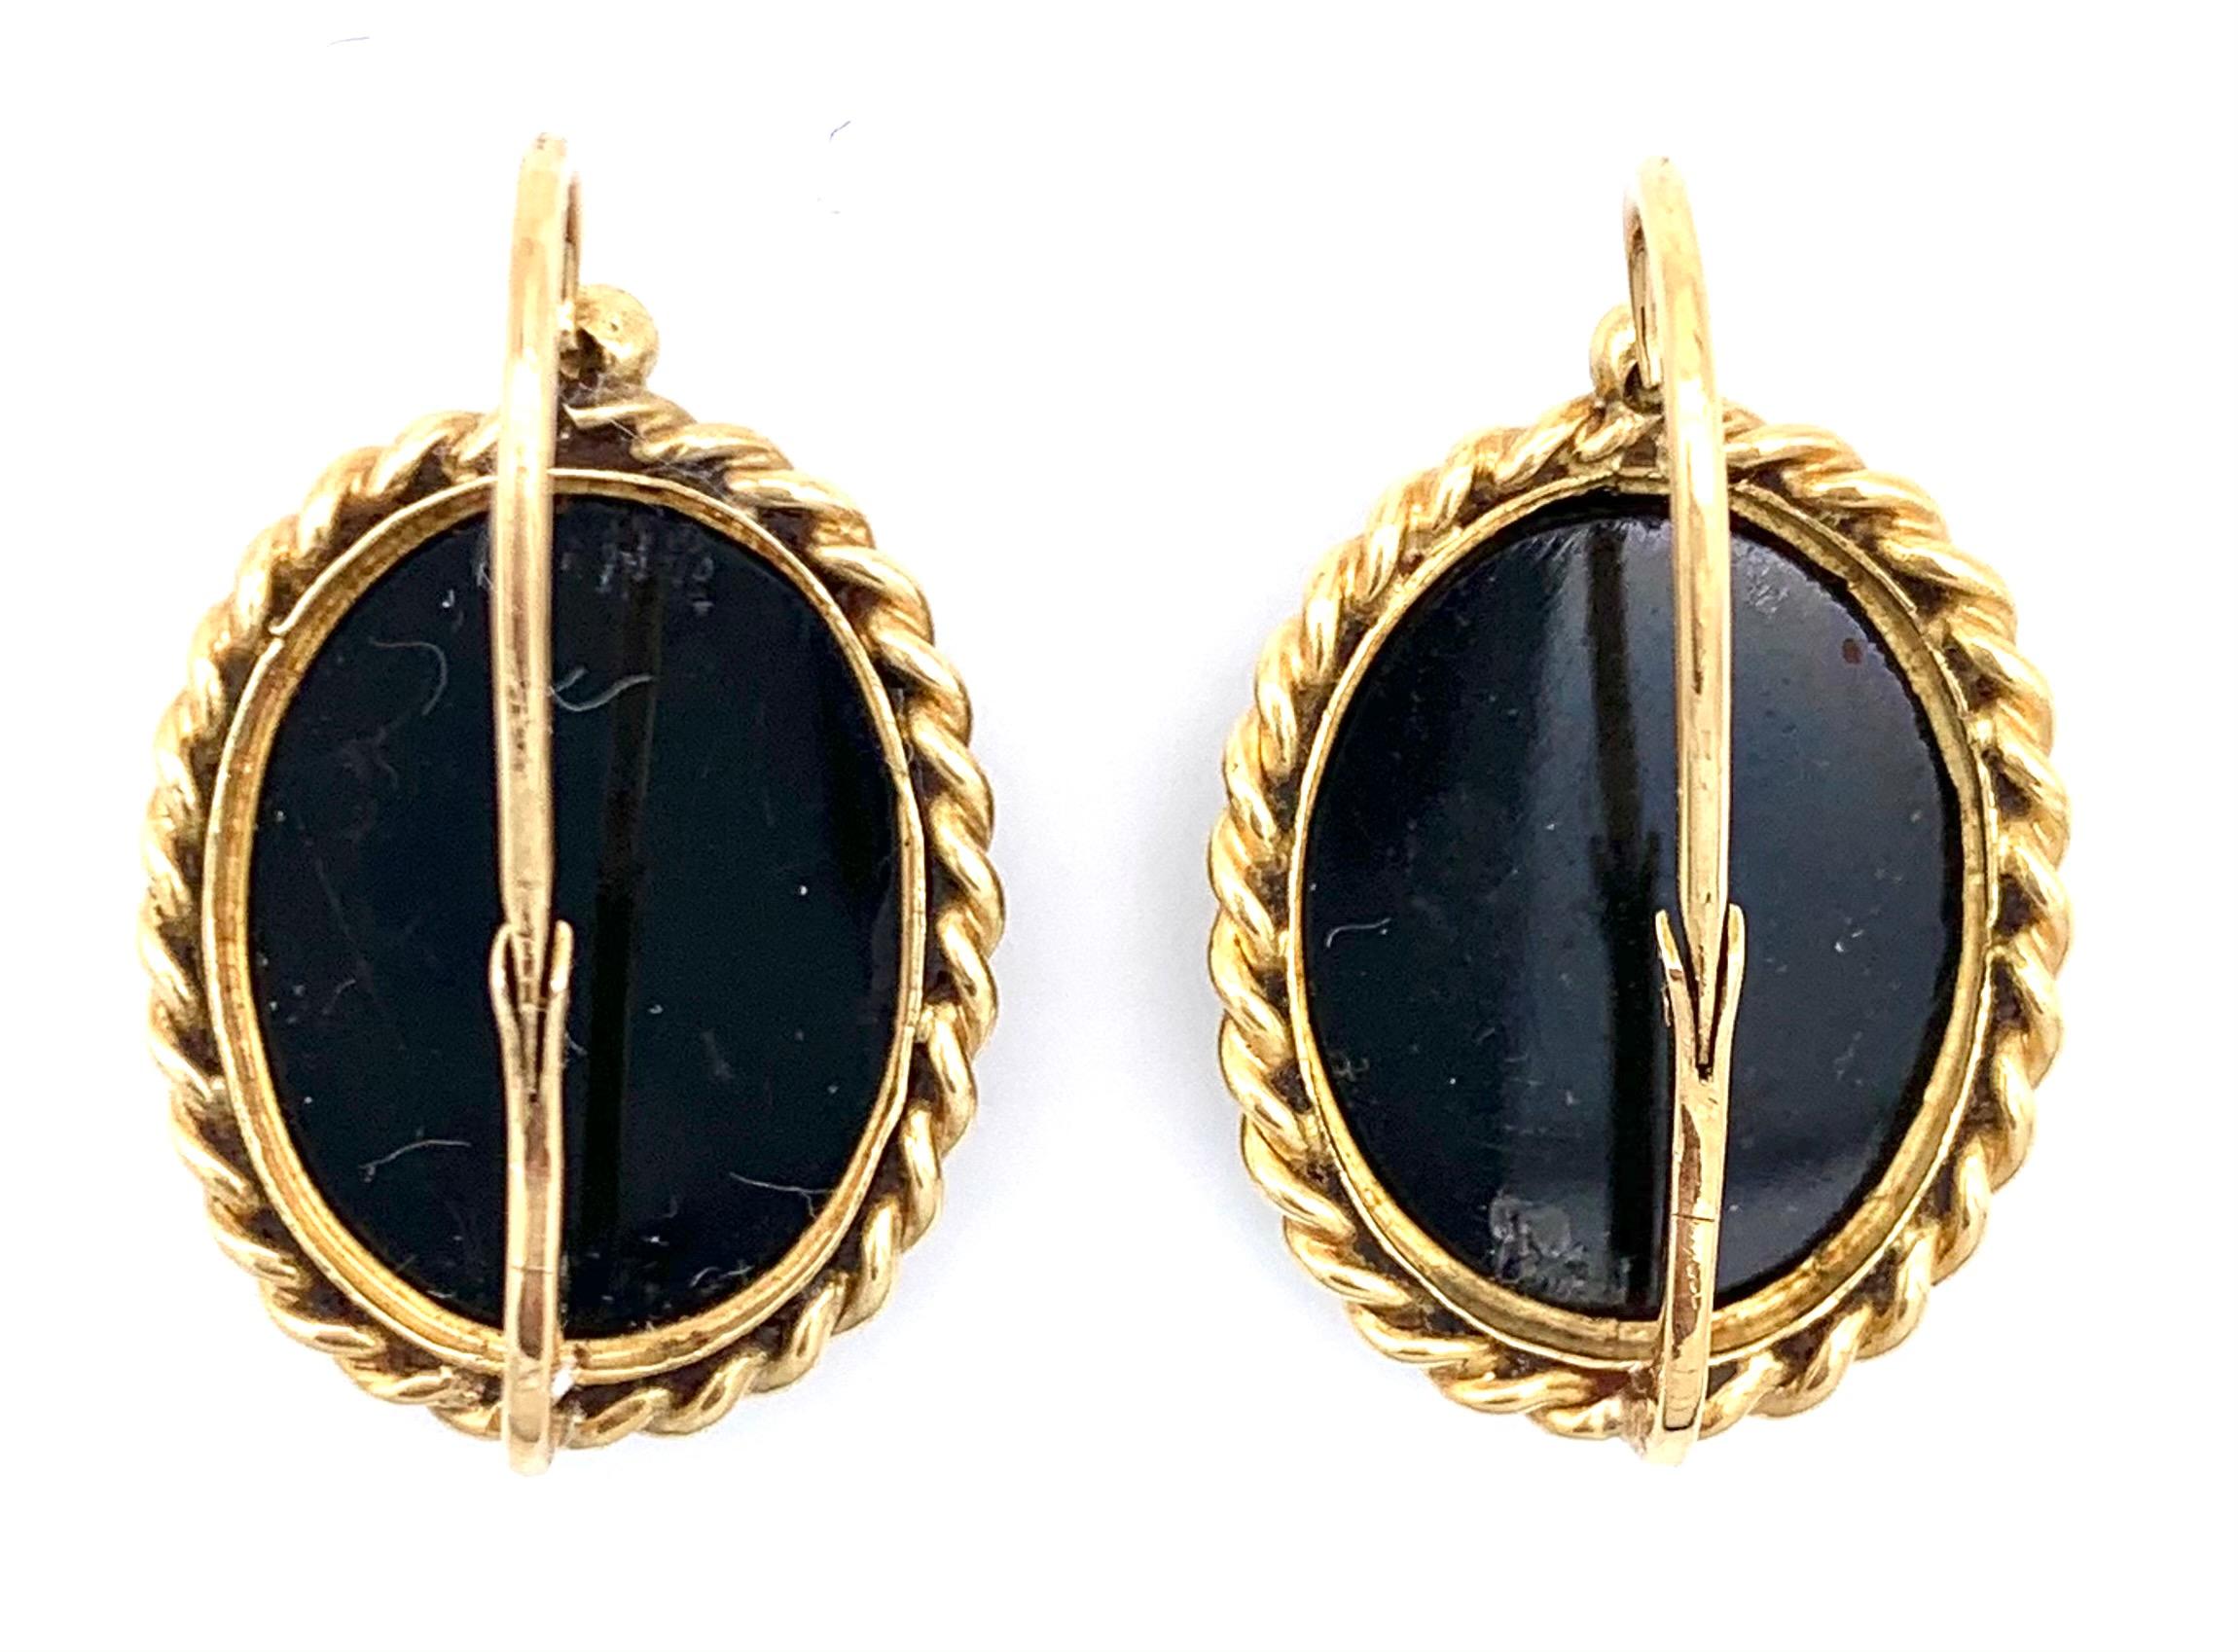 These elegant French dangling earrings are mounted in 18 karat gold settings decorated with twisted gold wire.
The mounts are marked with french hallmarks for 18 karat. 